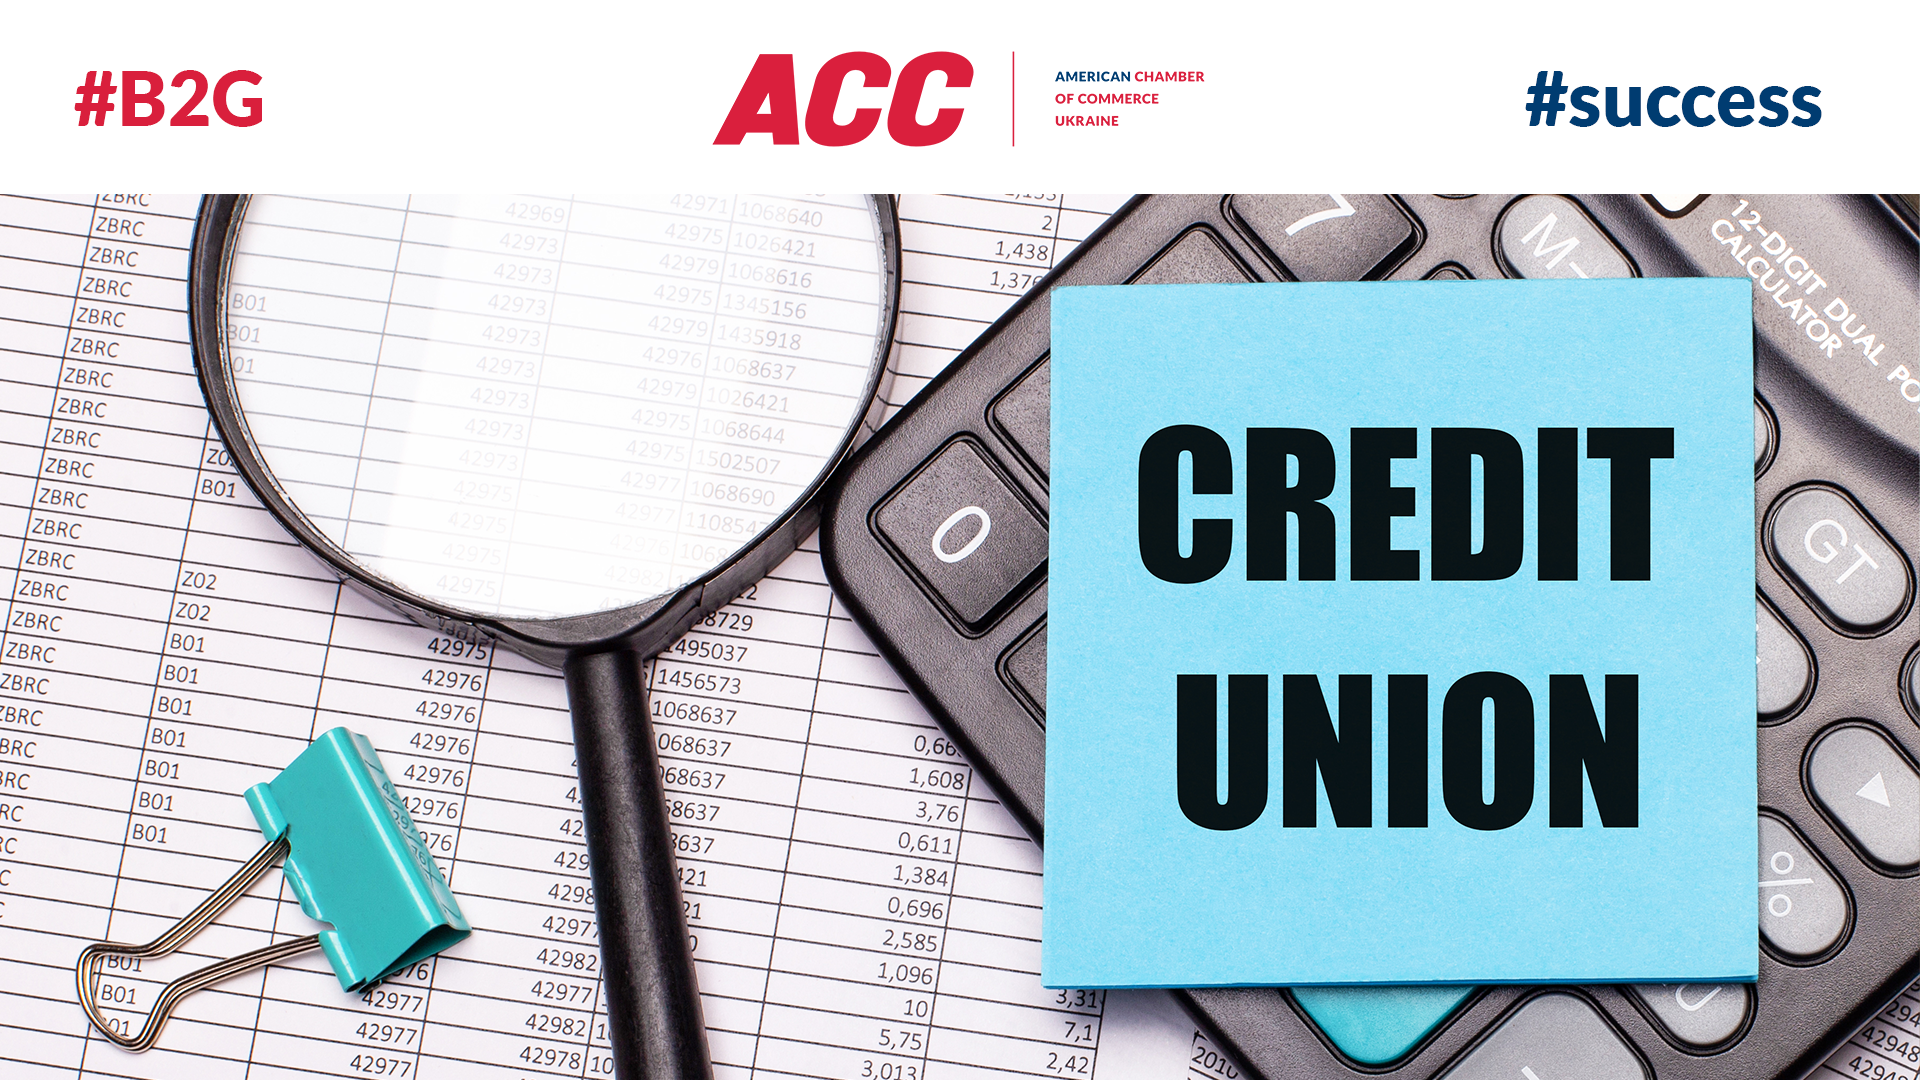 Policy Win: Parliament Adopted Draft Law #5125 “On Credit Unions”